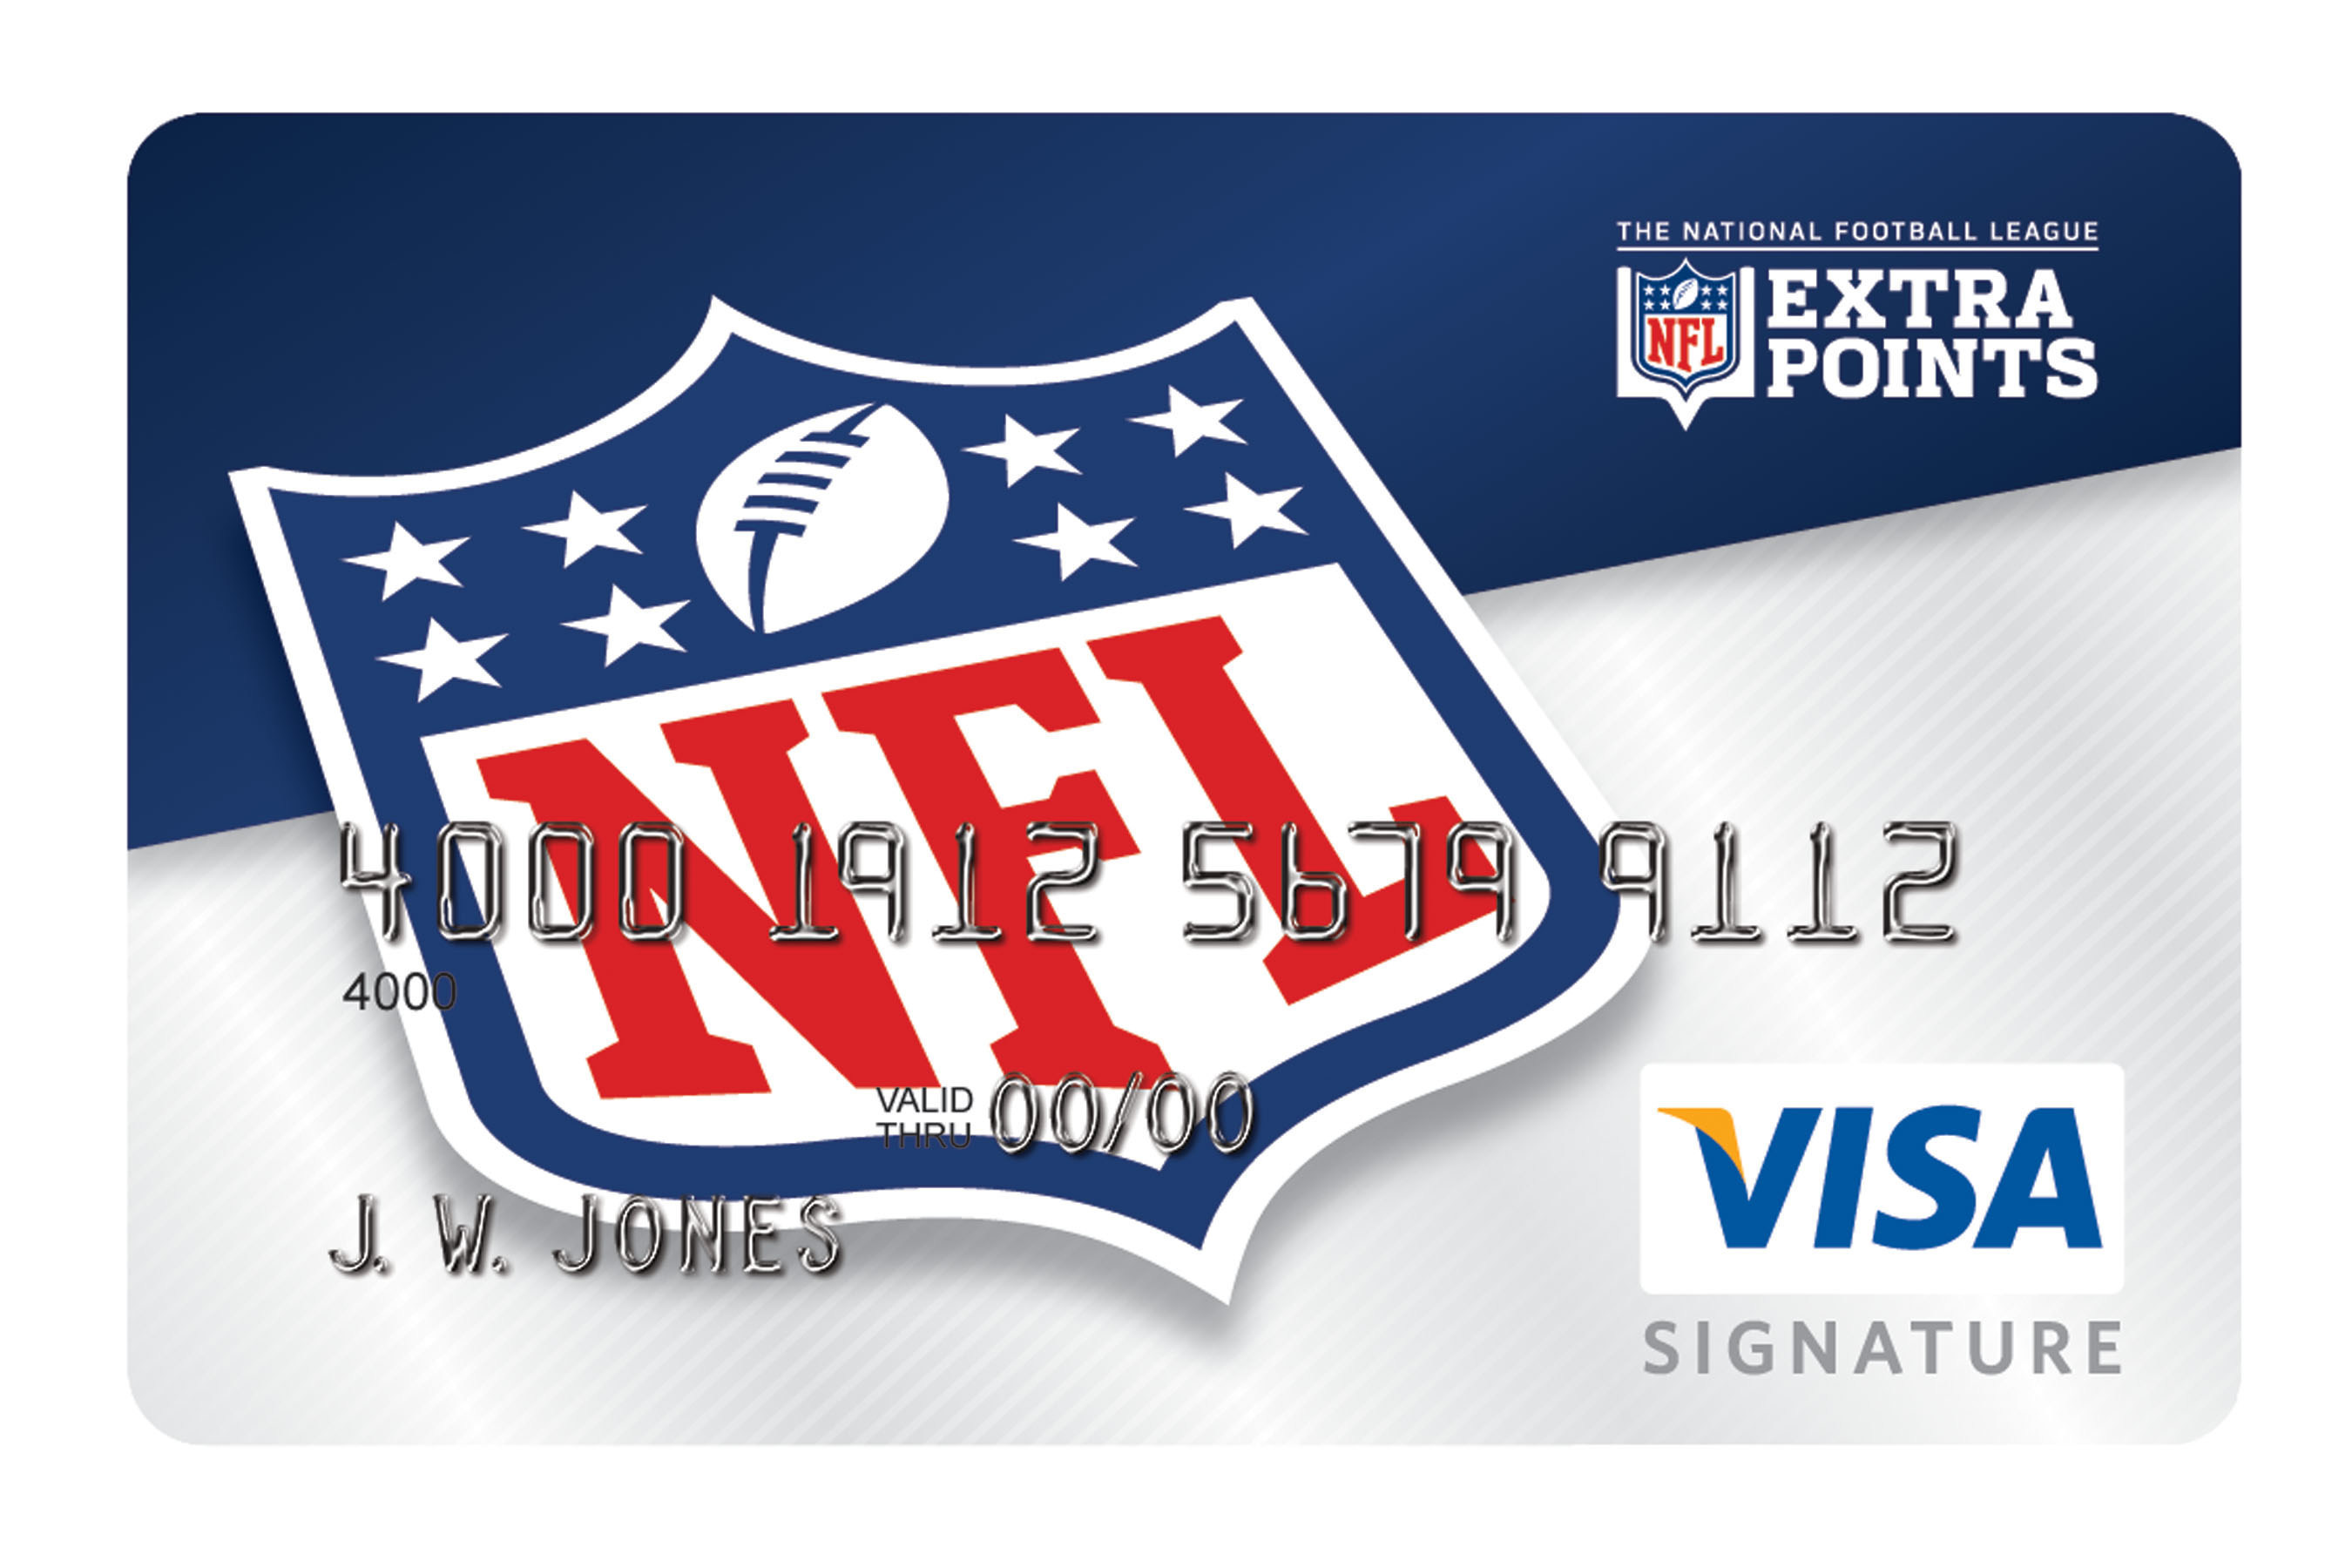 The NFL Extra Points credit card, issued by Barclaycard, offers a card design for every team and enables fans to earn points for every dollar spent.